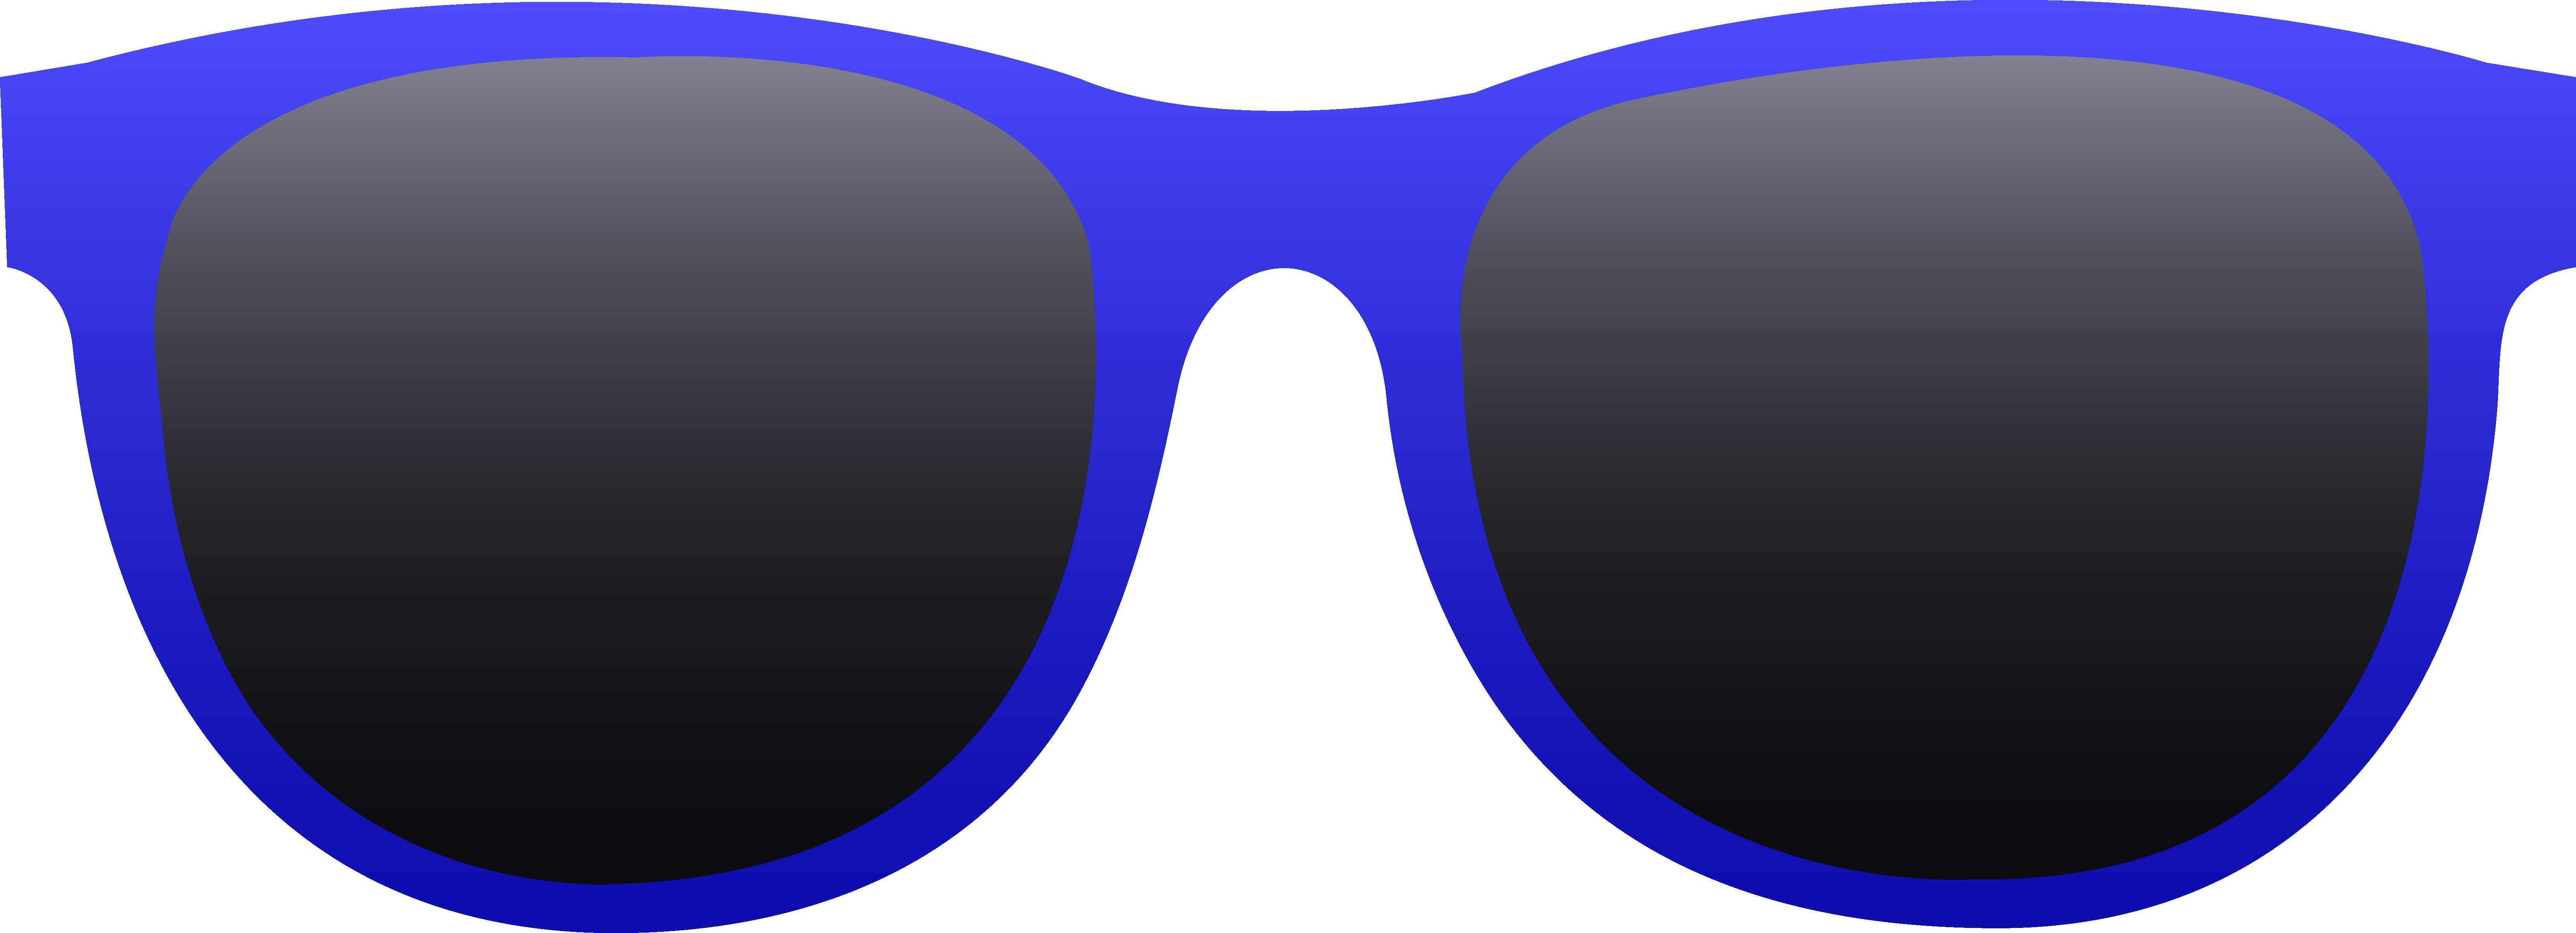 Shades clipart - Clipground